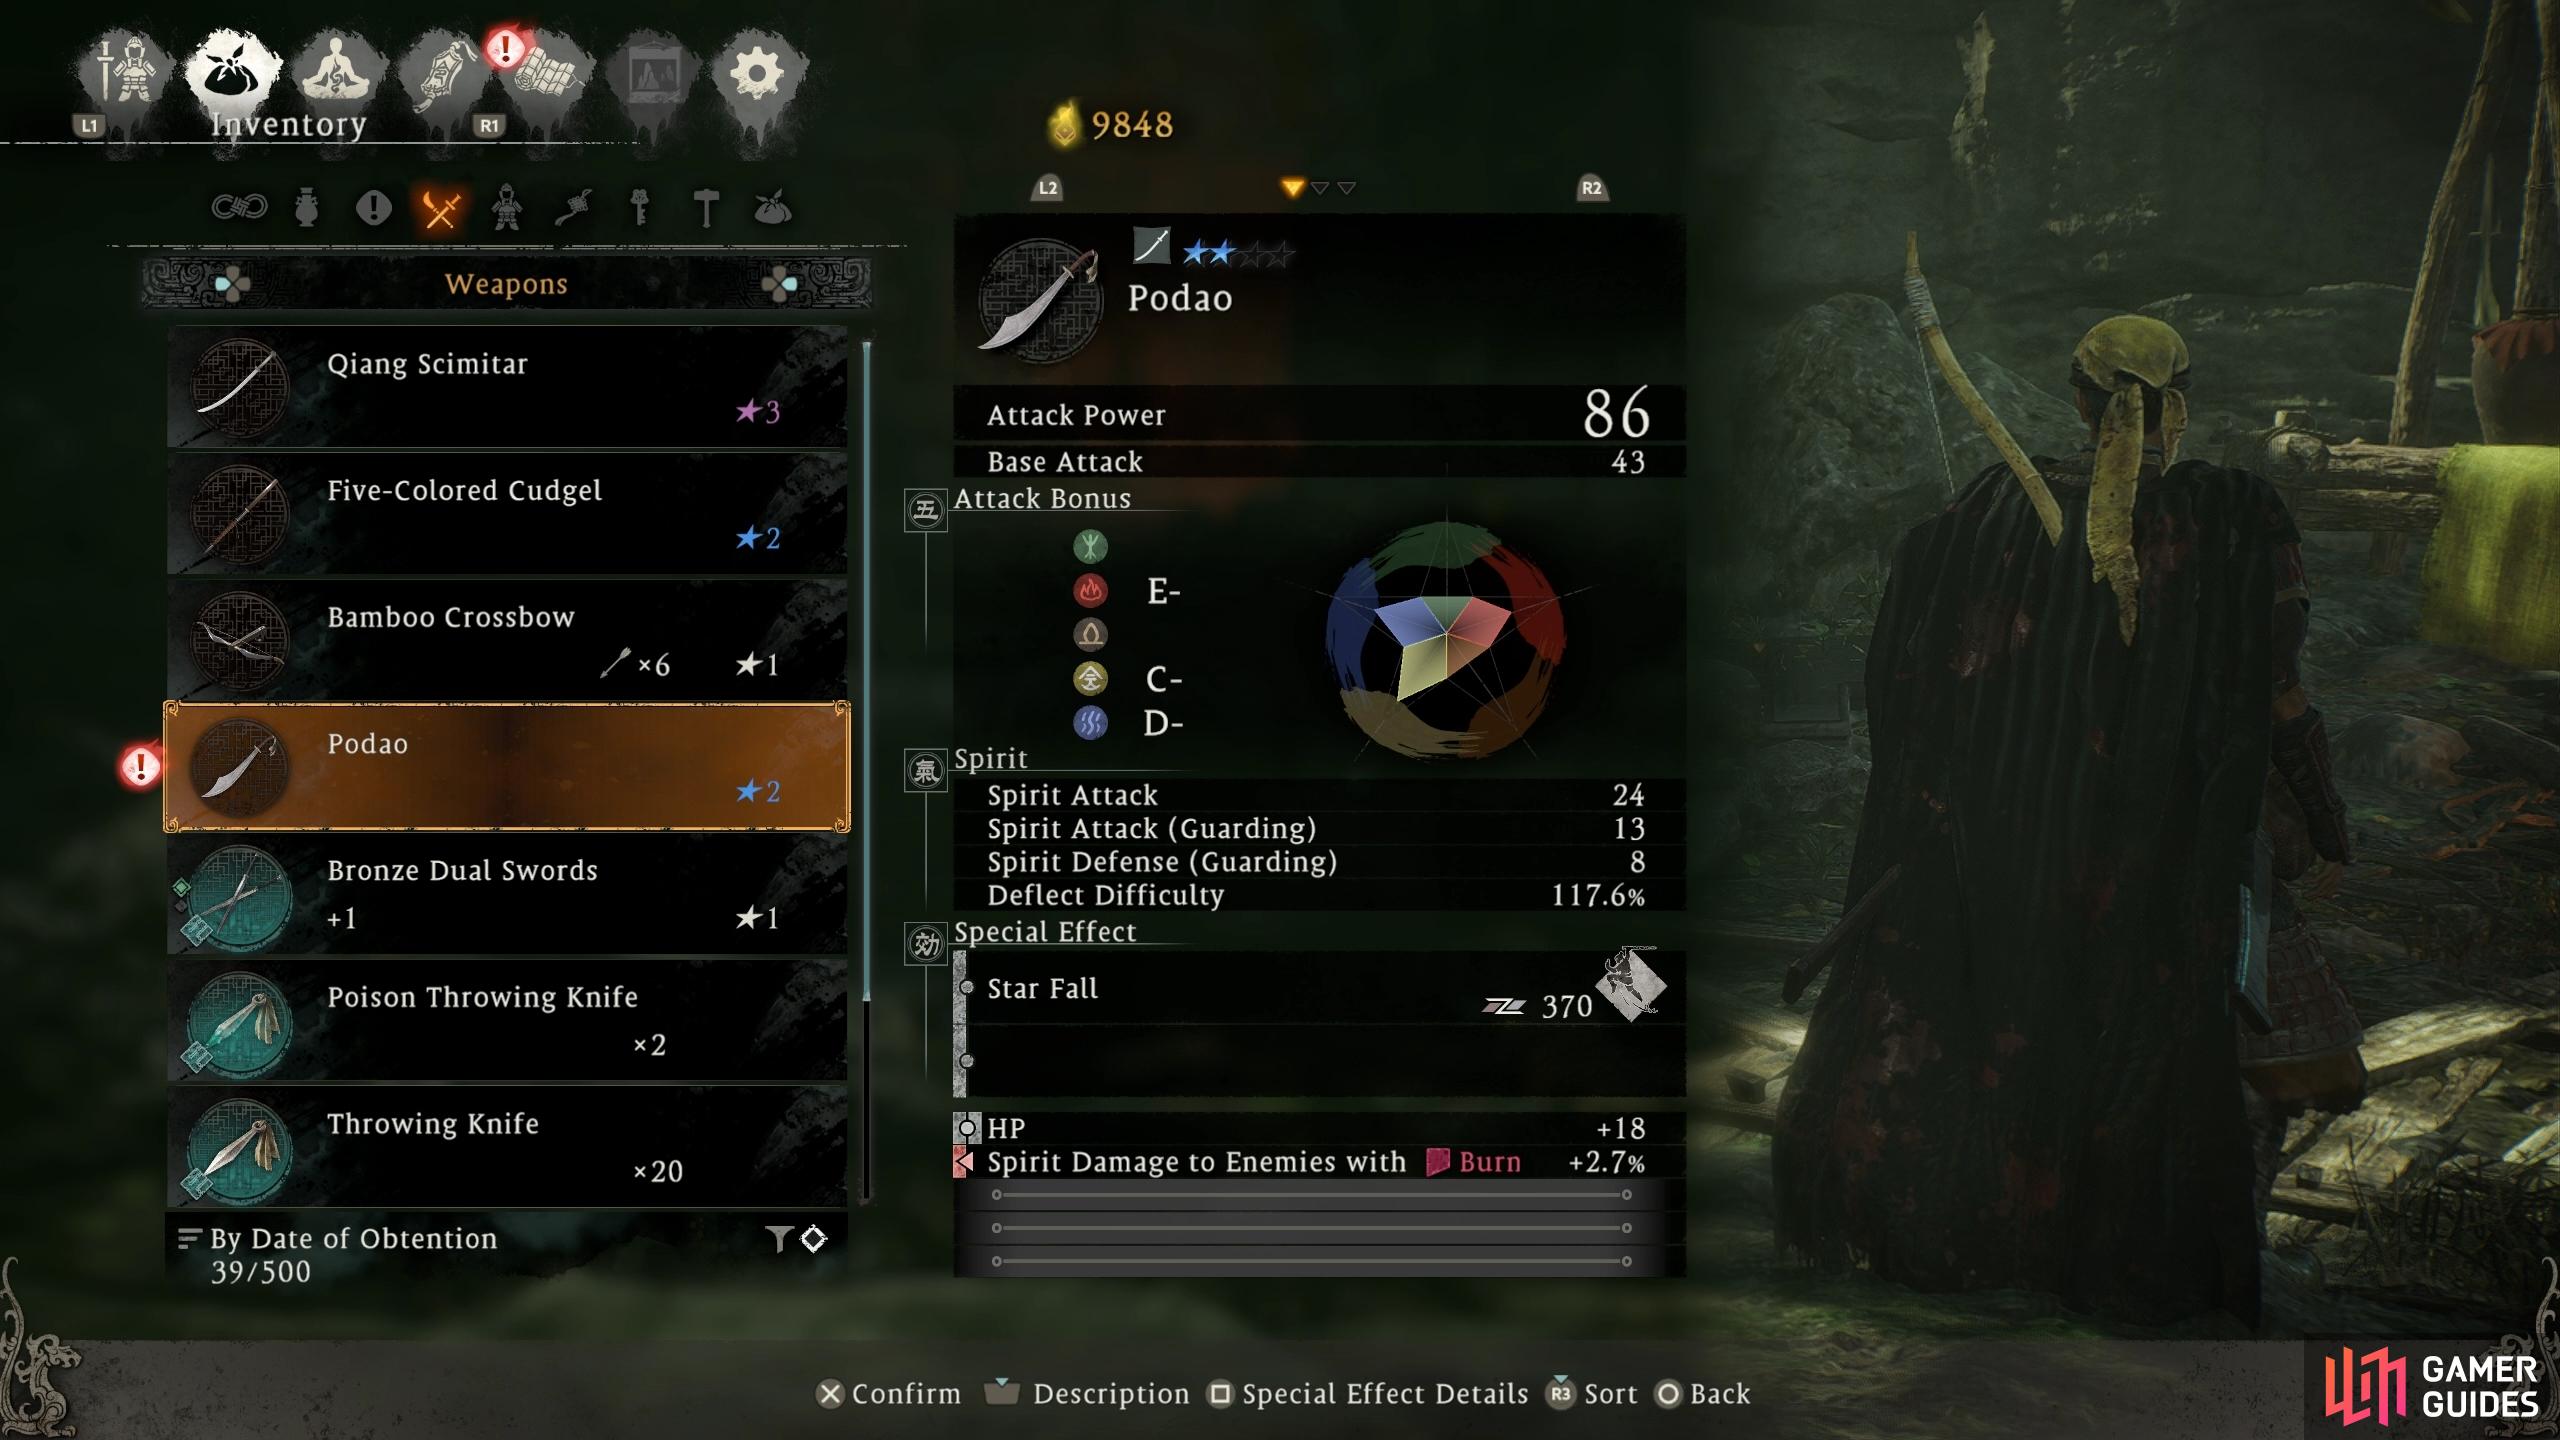 You can select most weapons or armor pieces to feed the Shitieshou Demon.